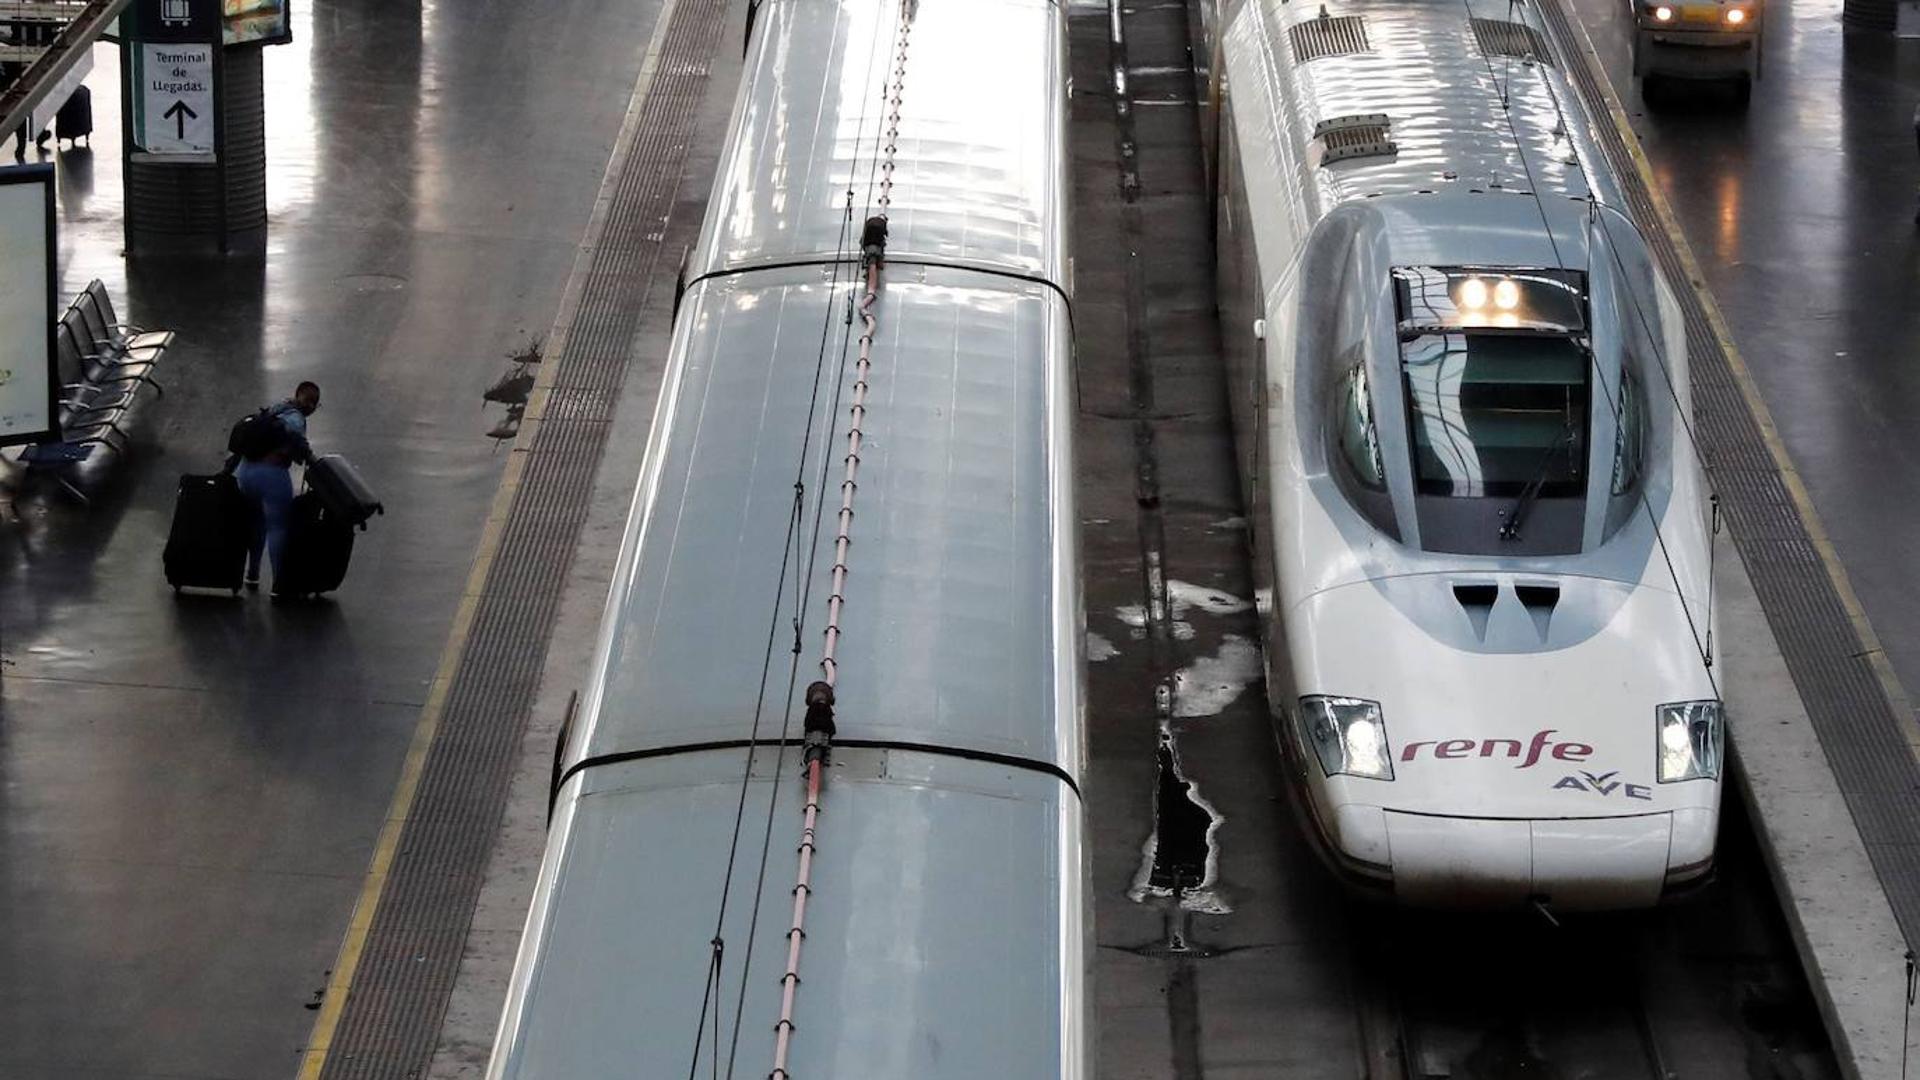 Renfe arrives in France with tickets from 9 euros